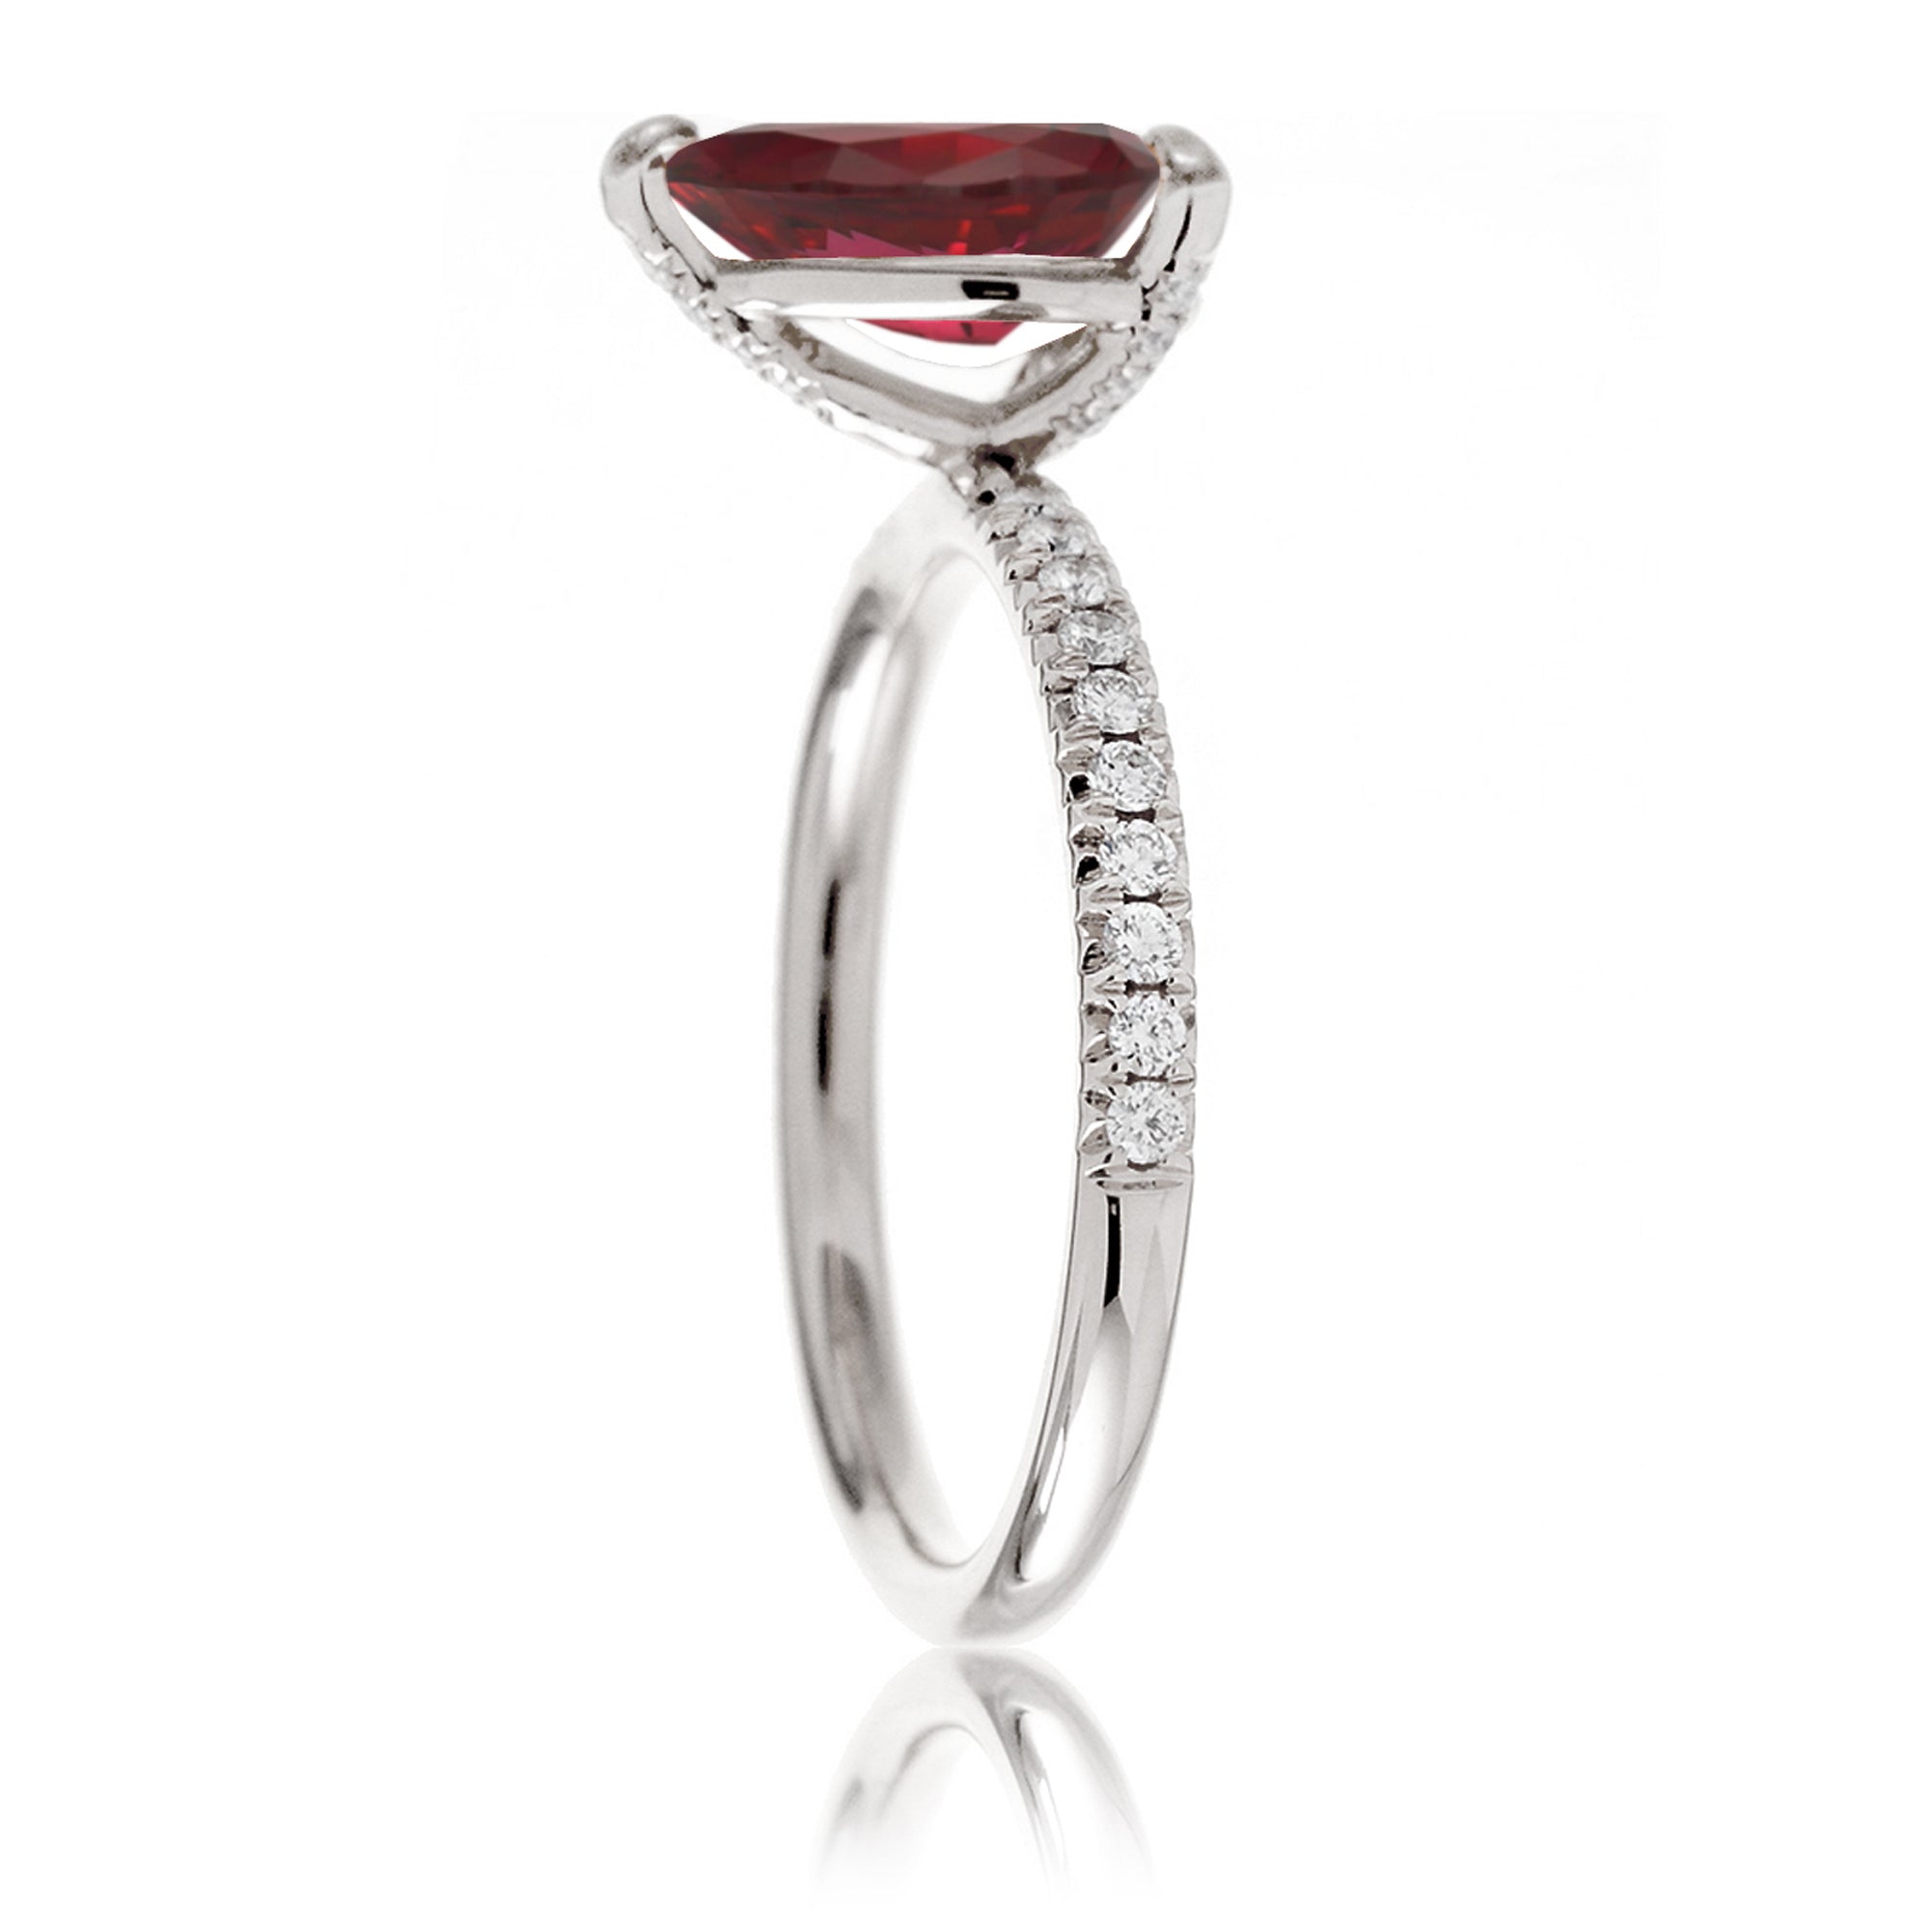 Pear cut lab-grown ruby engagement ring diamond band white gold - the Ava